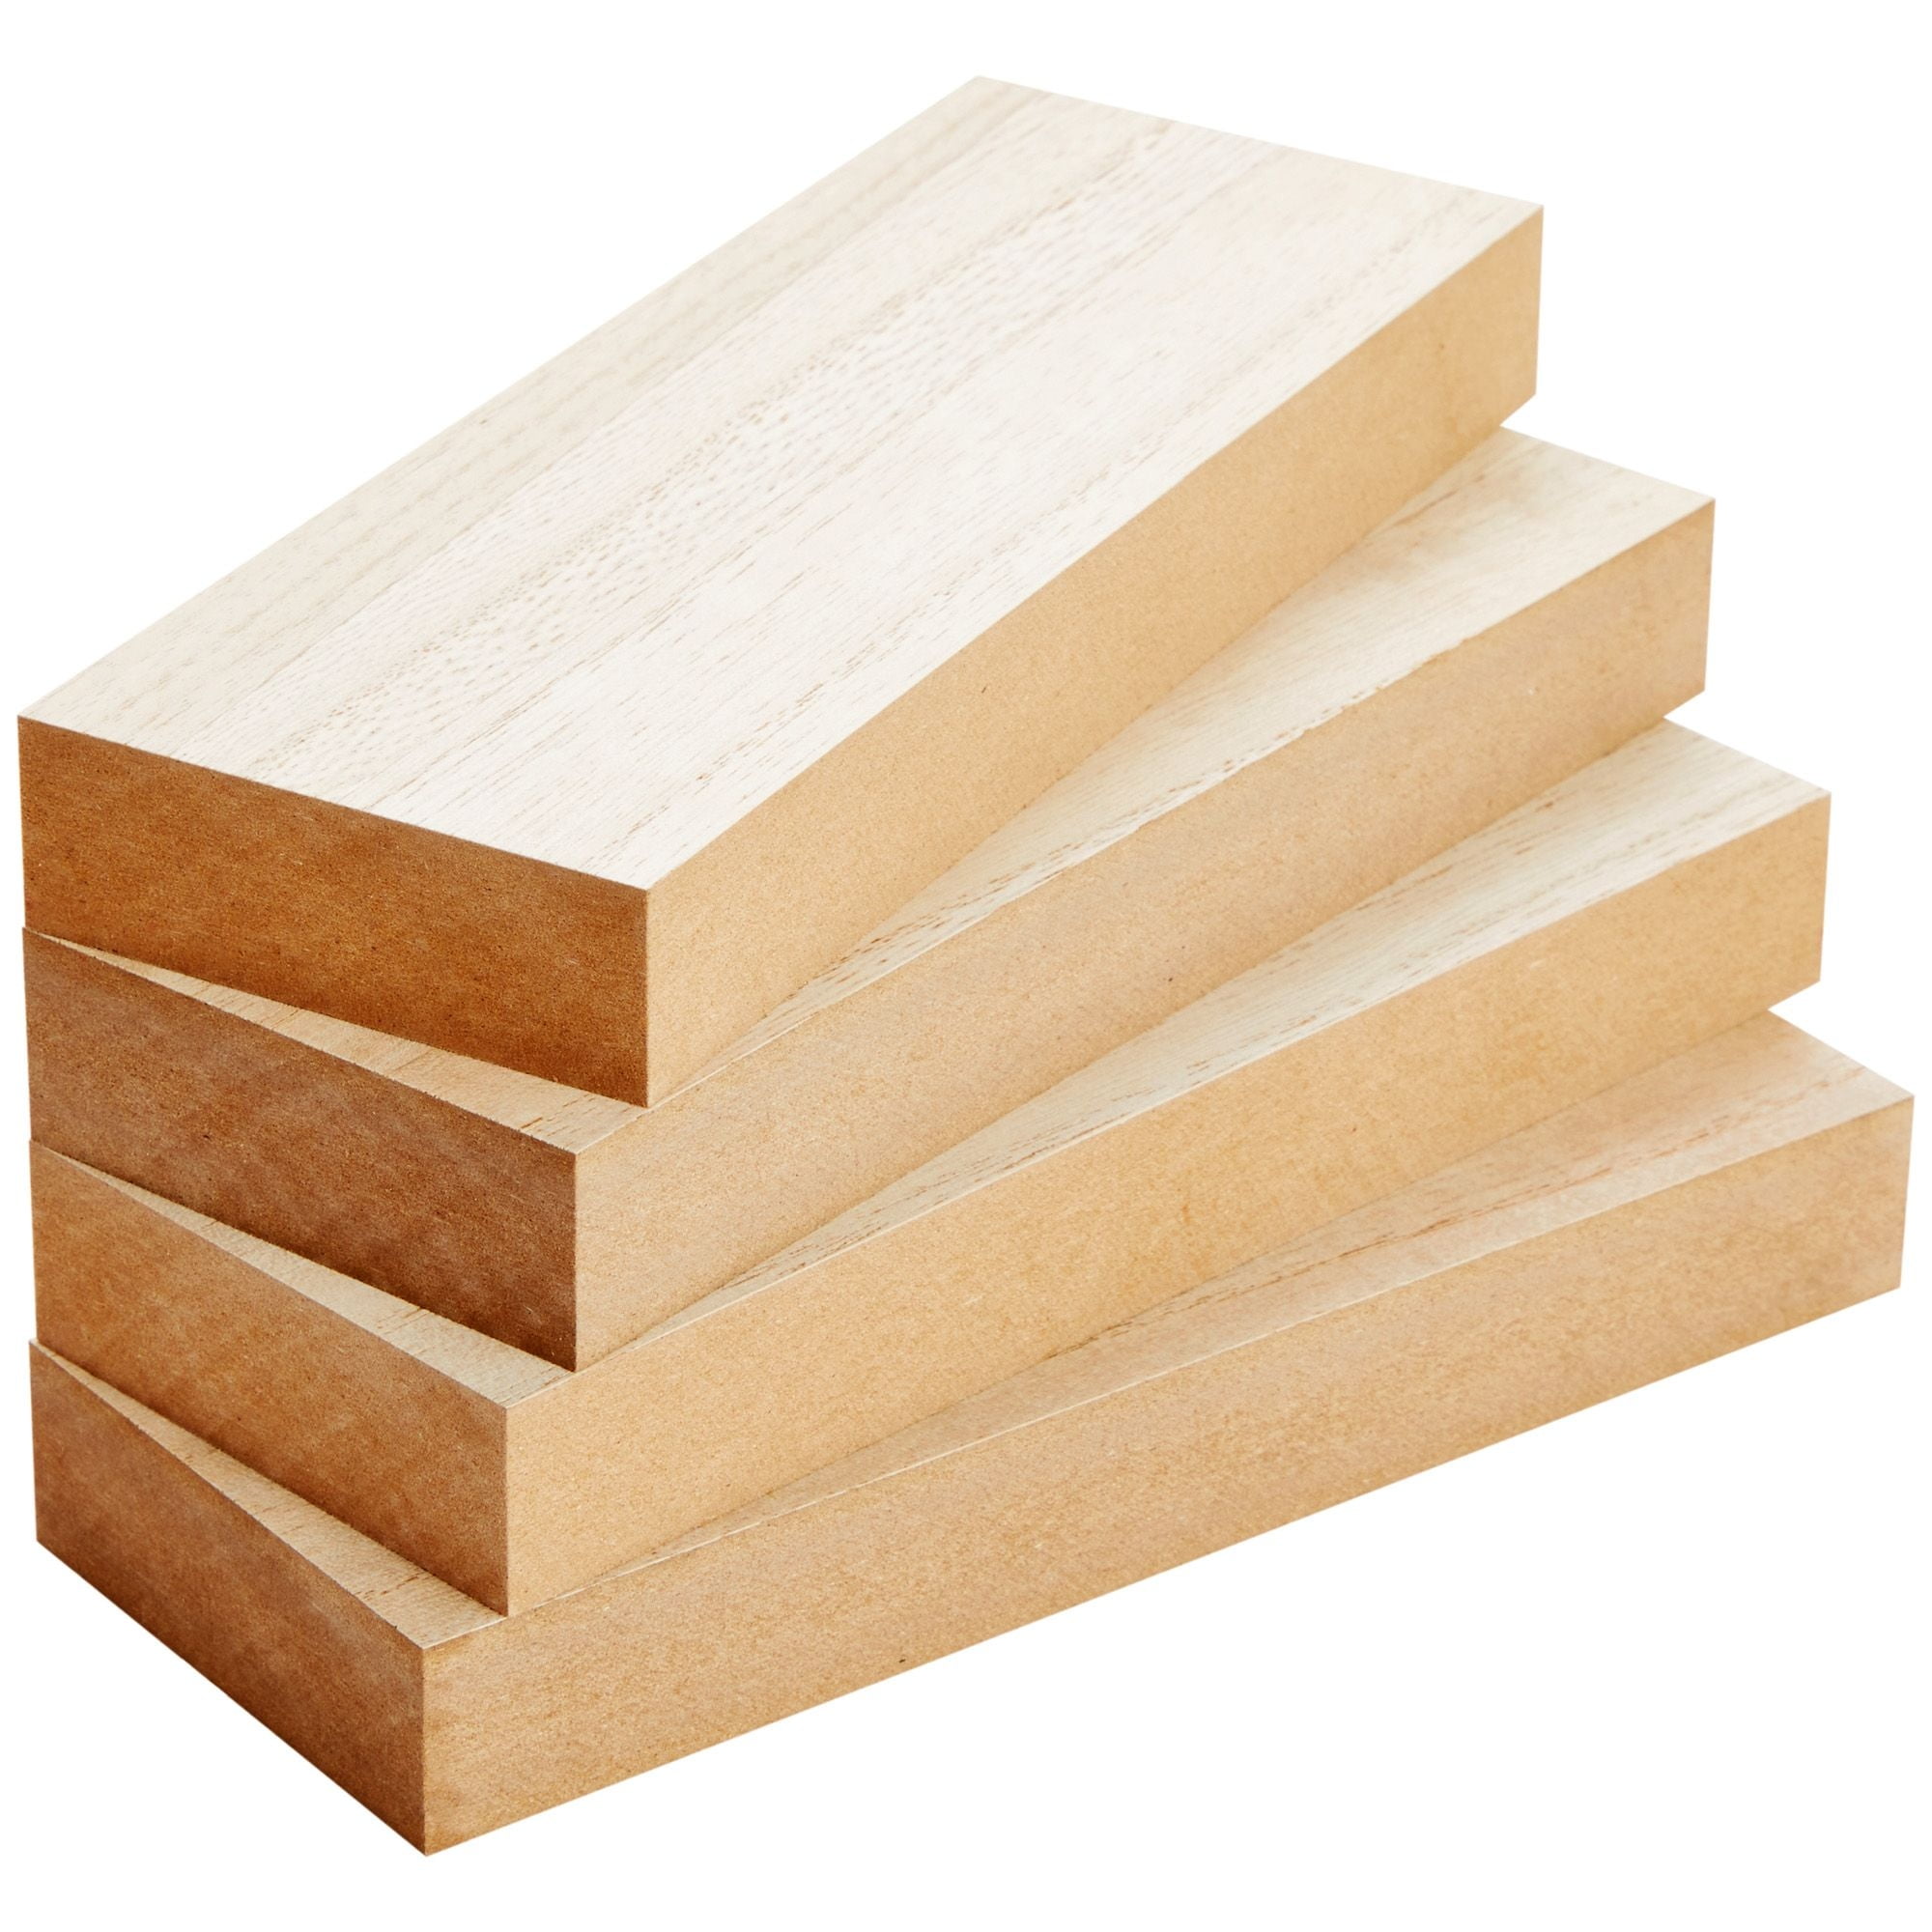 Wood Blanks, for Signs, Crafting, or Painting, Bulk Wood Blanks, Scrap